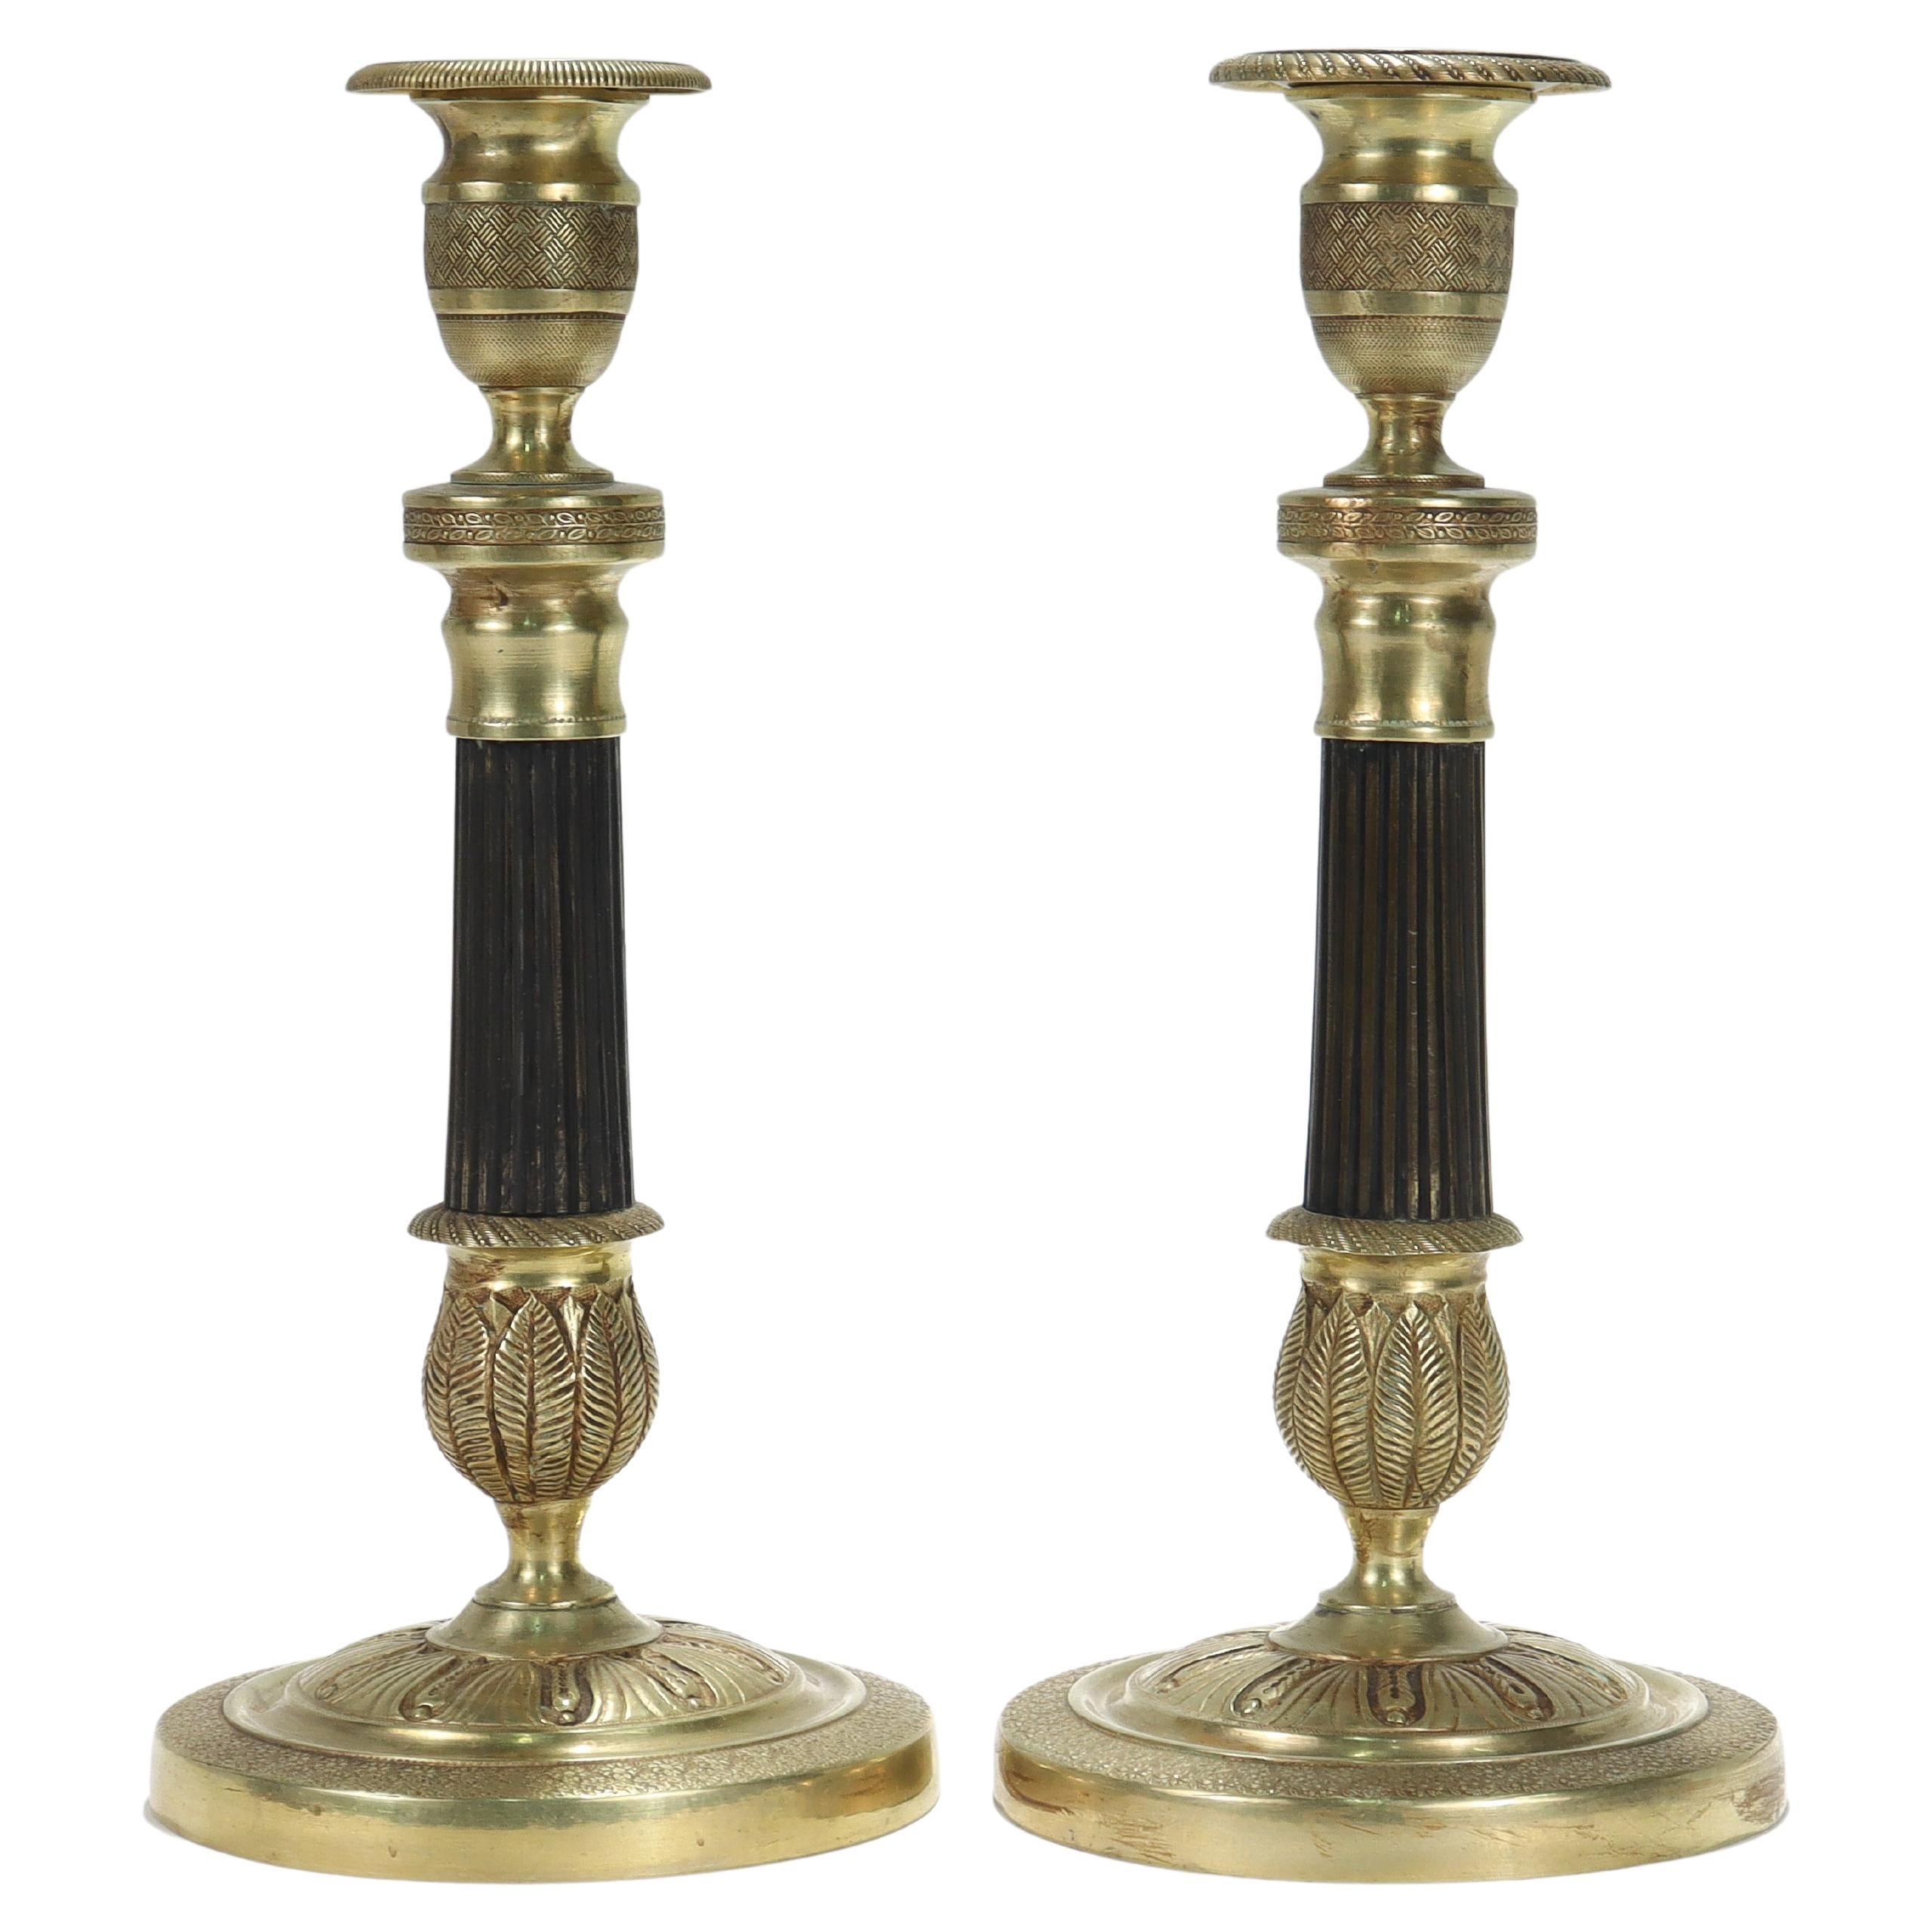 Pair of French Empire Style Gilt Bronze Candlesticks